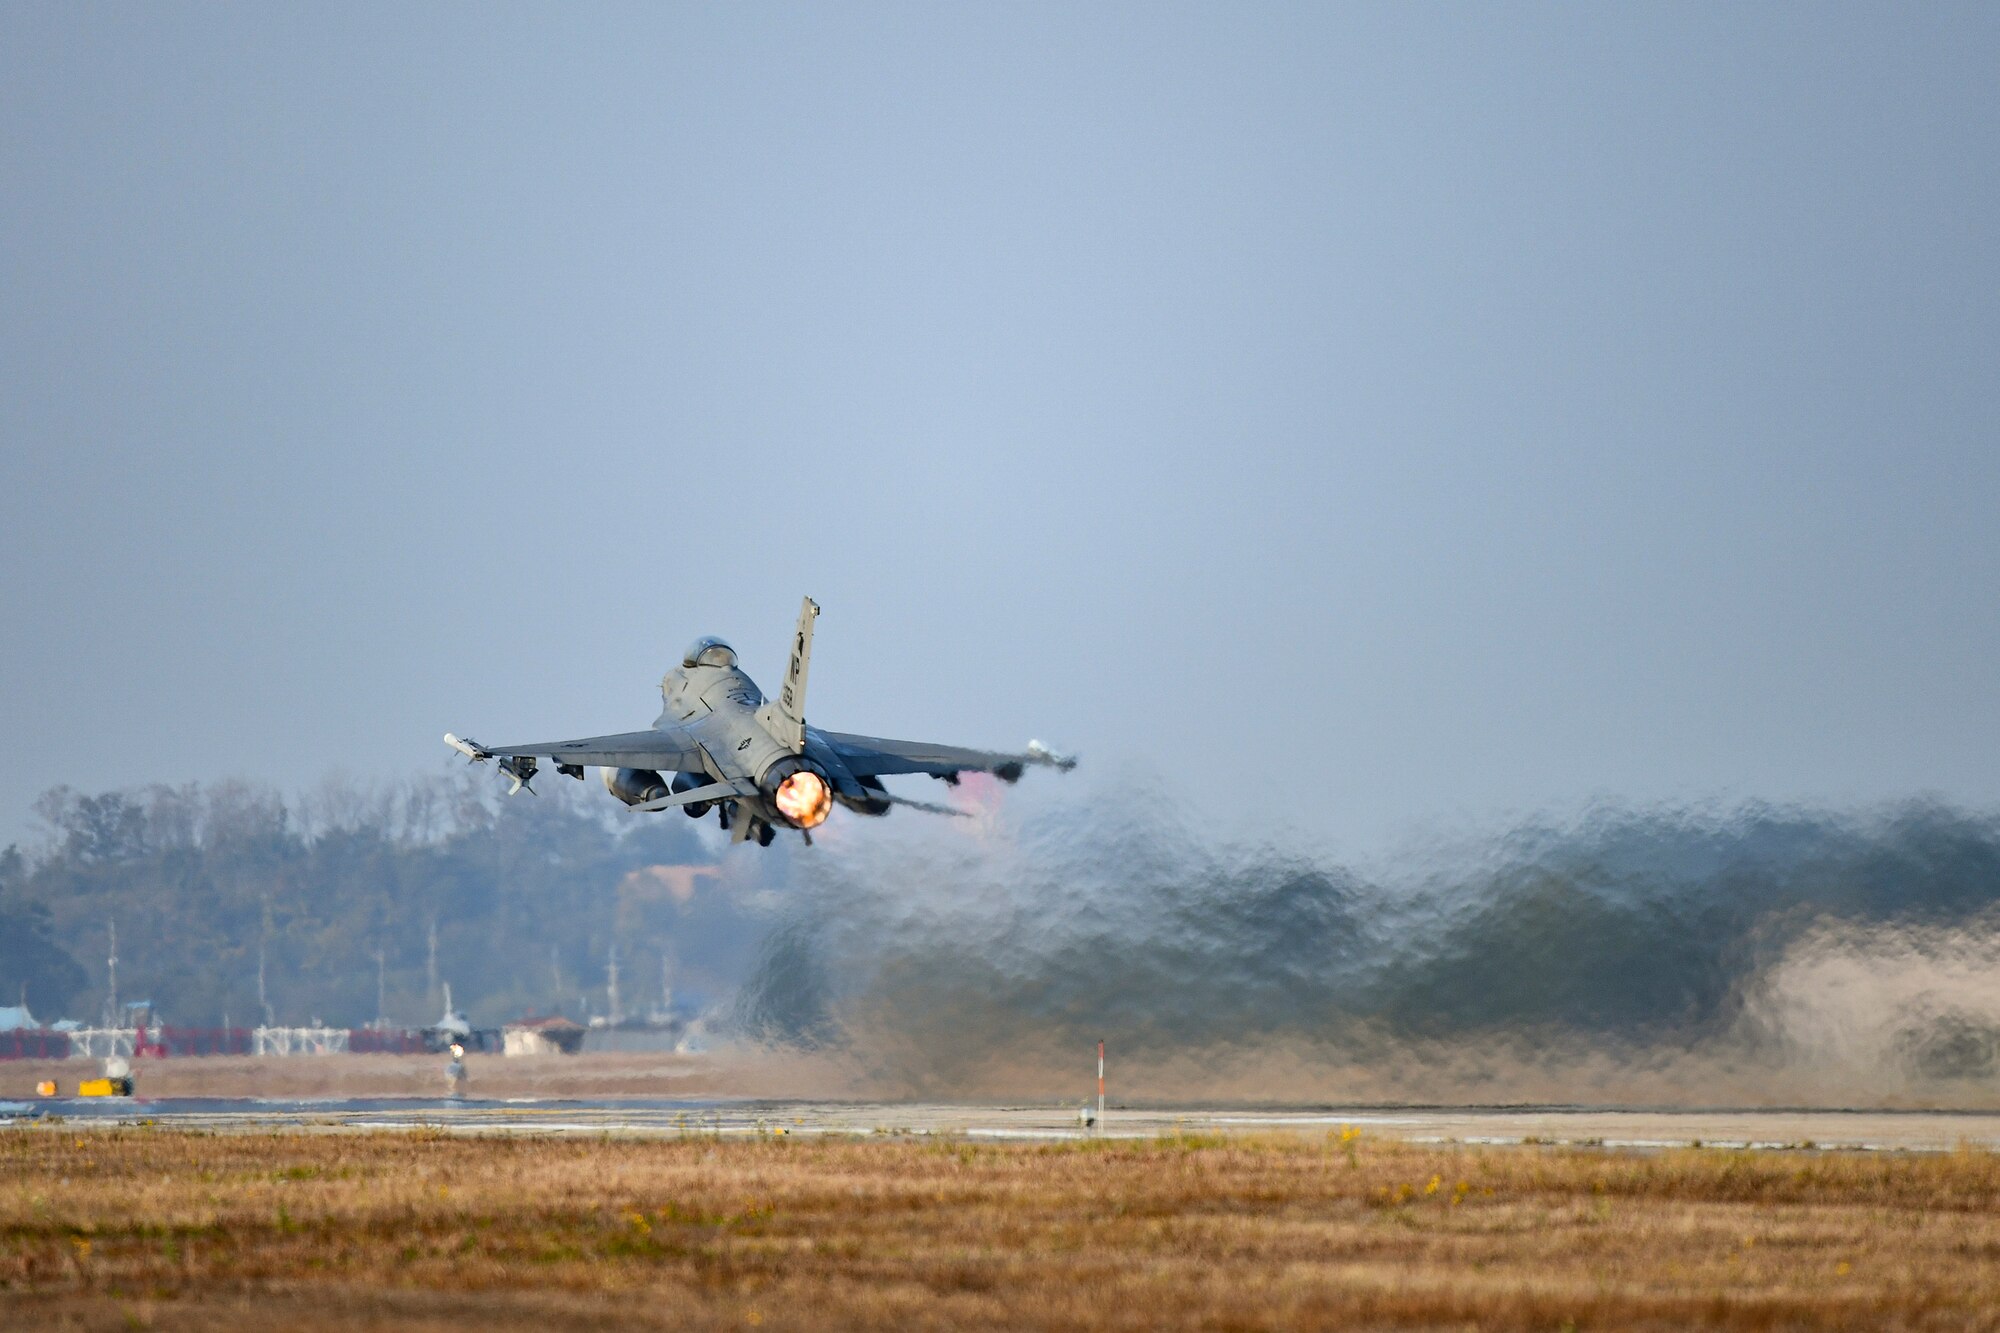 A fighter jet takes off.